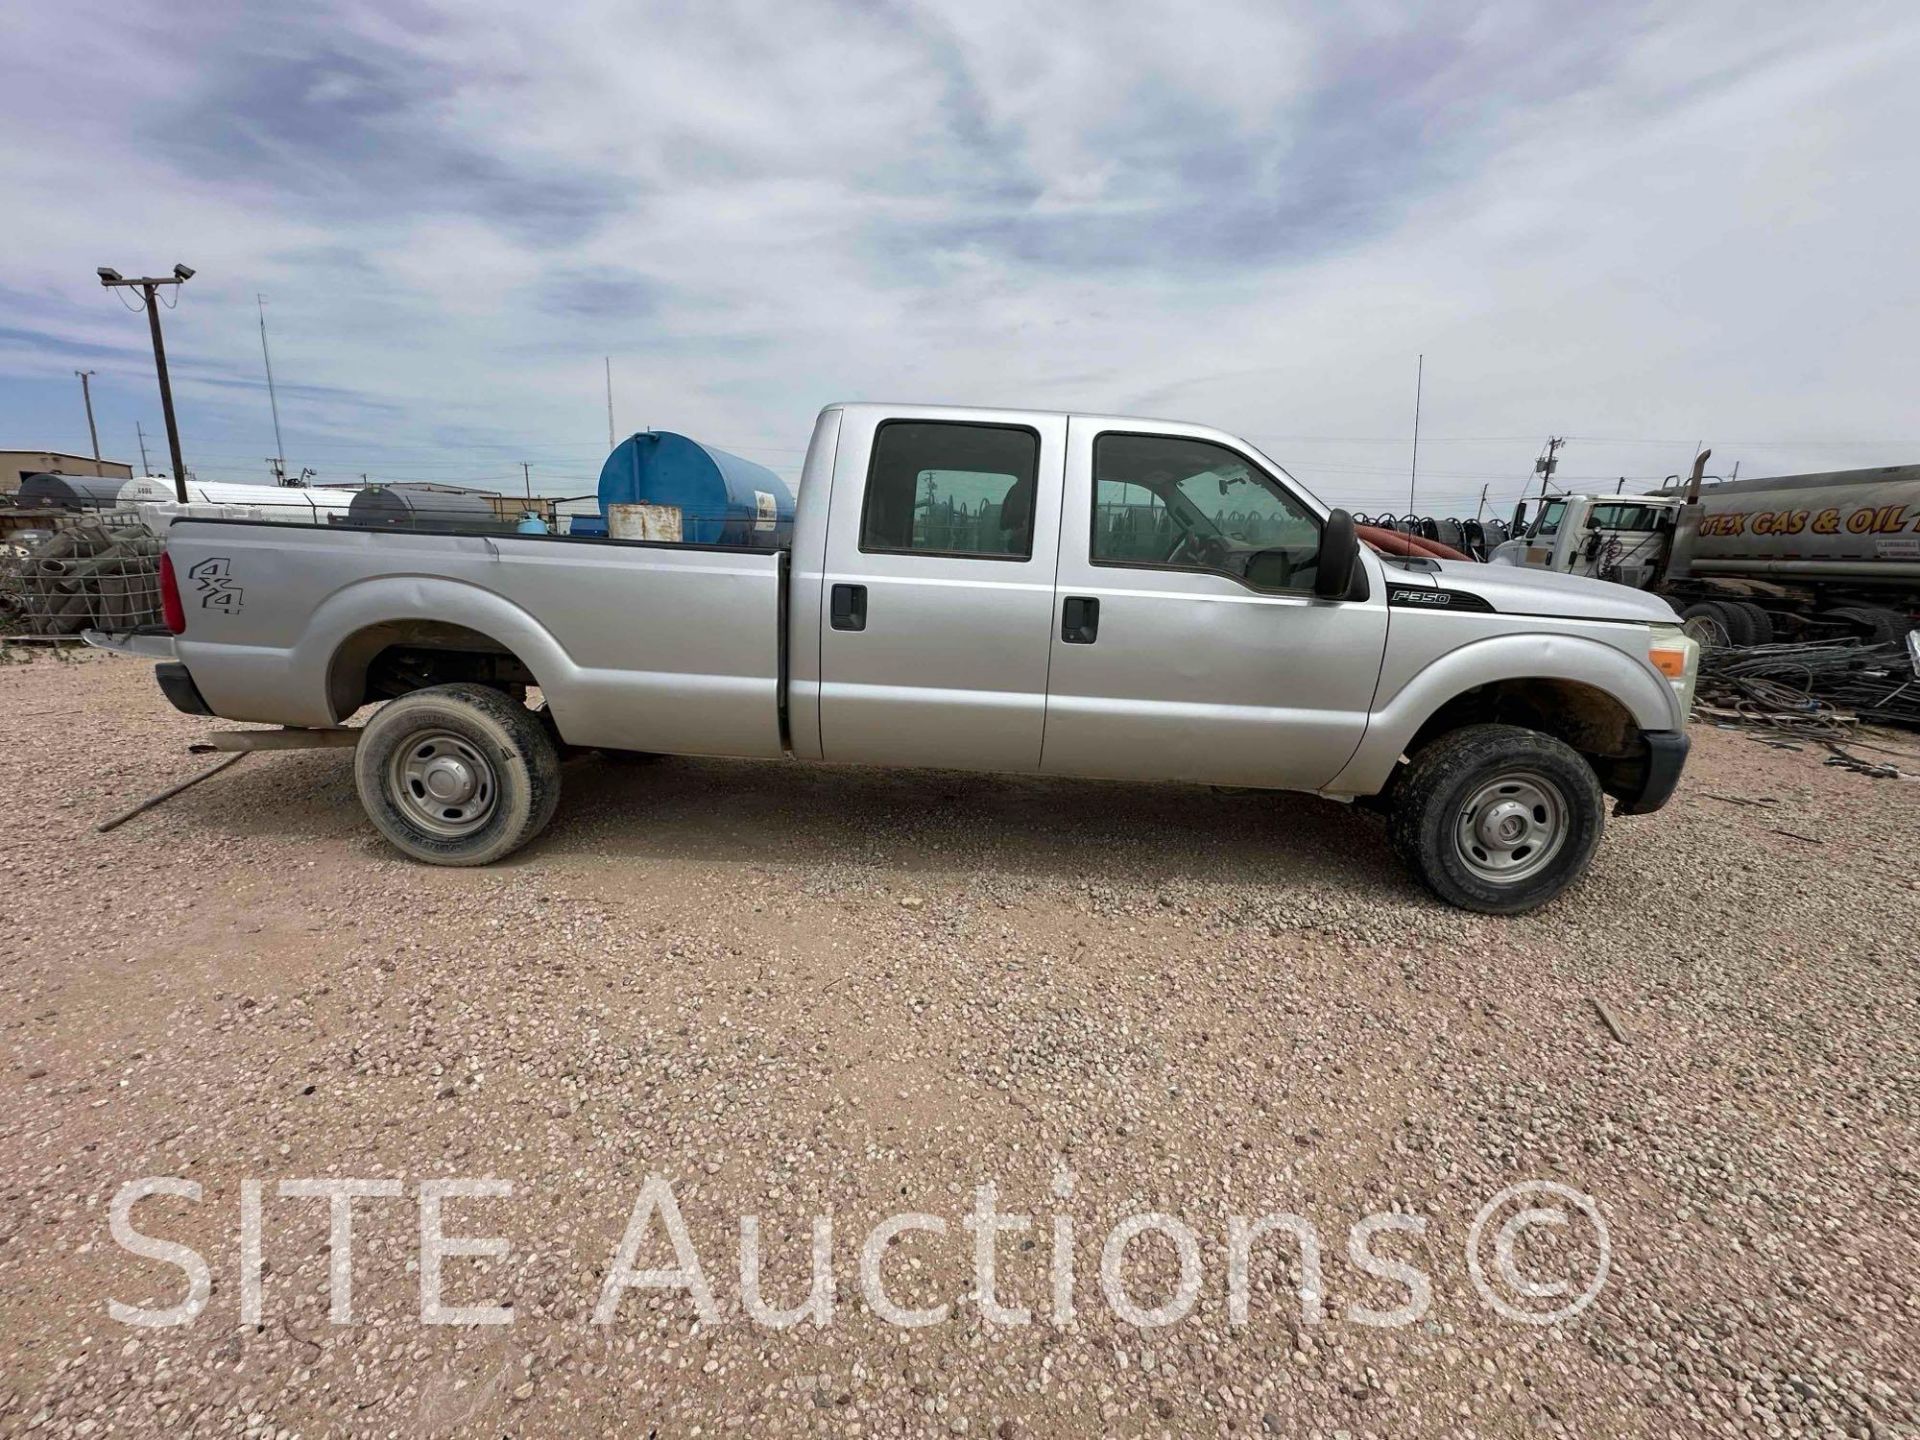 2011 Ford F350 SD Crew Cab Pickup Truck - Image 3 of 19